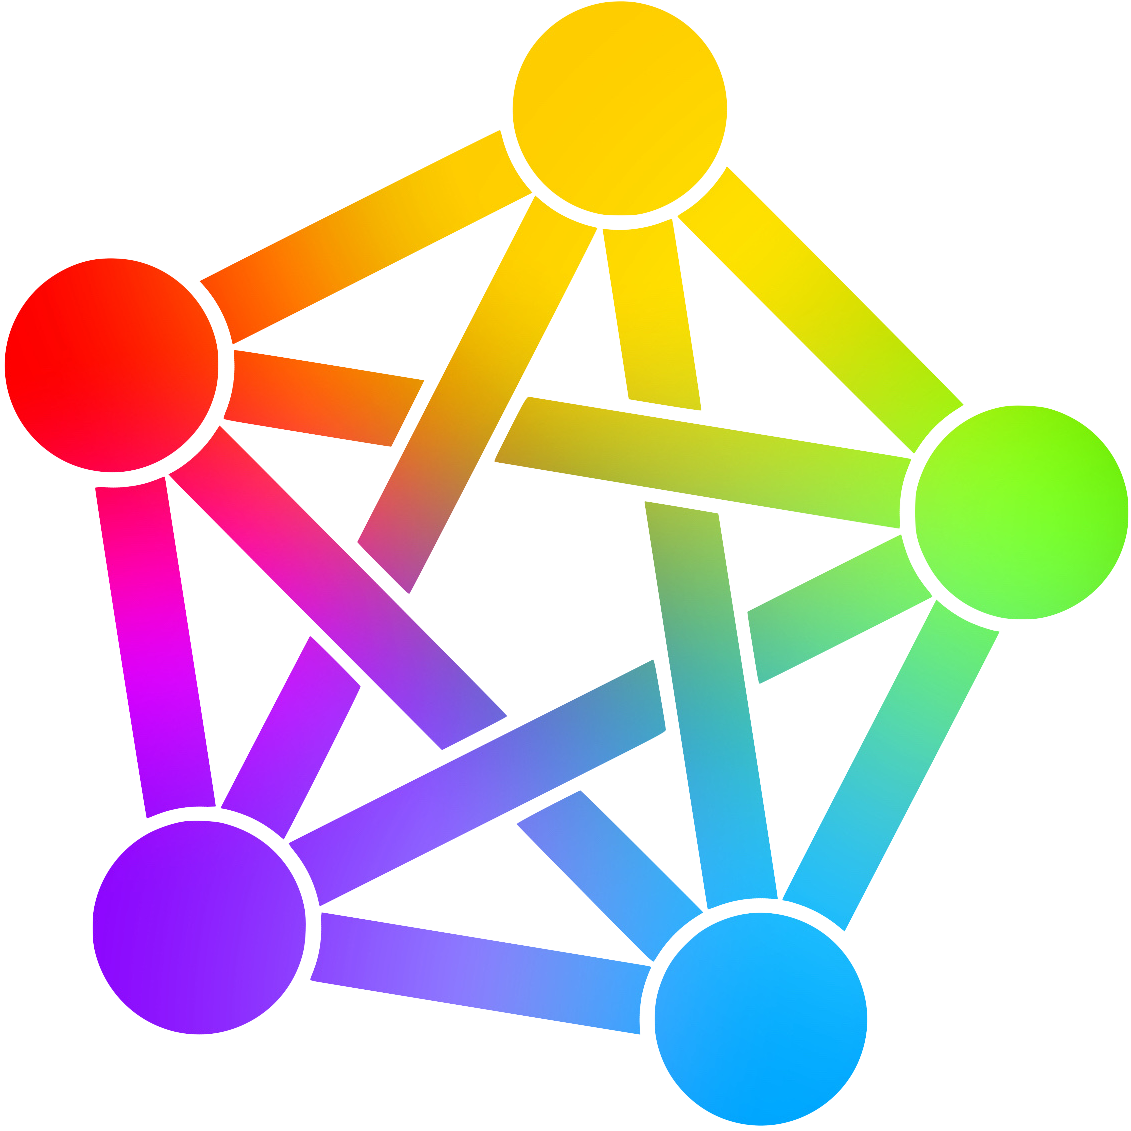 The proposed Fediverse symbol, a pentagram with five dots coloured red, yellow, green, blue, and purple, each connecting to each other. In this version the connecting lines are gradients rather than solid colours.